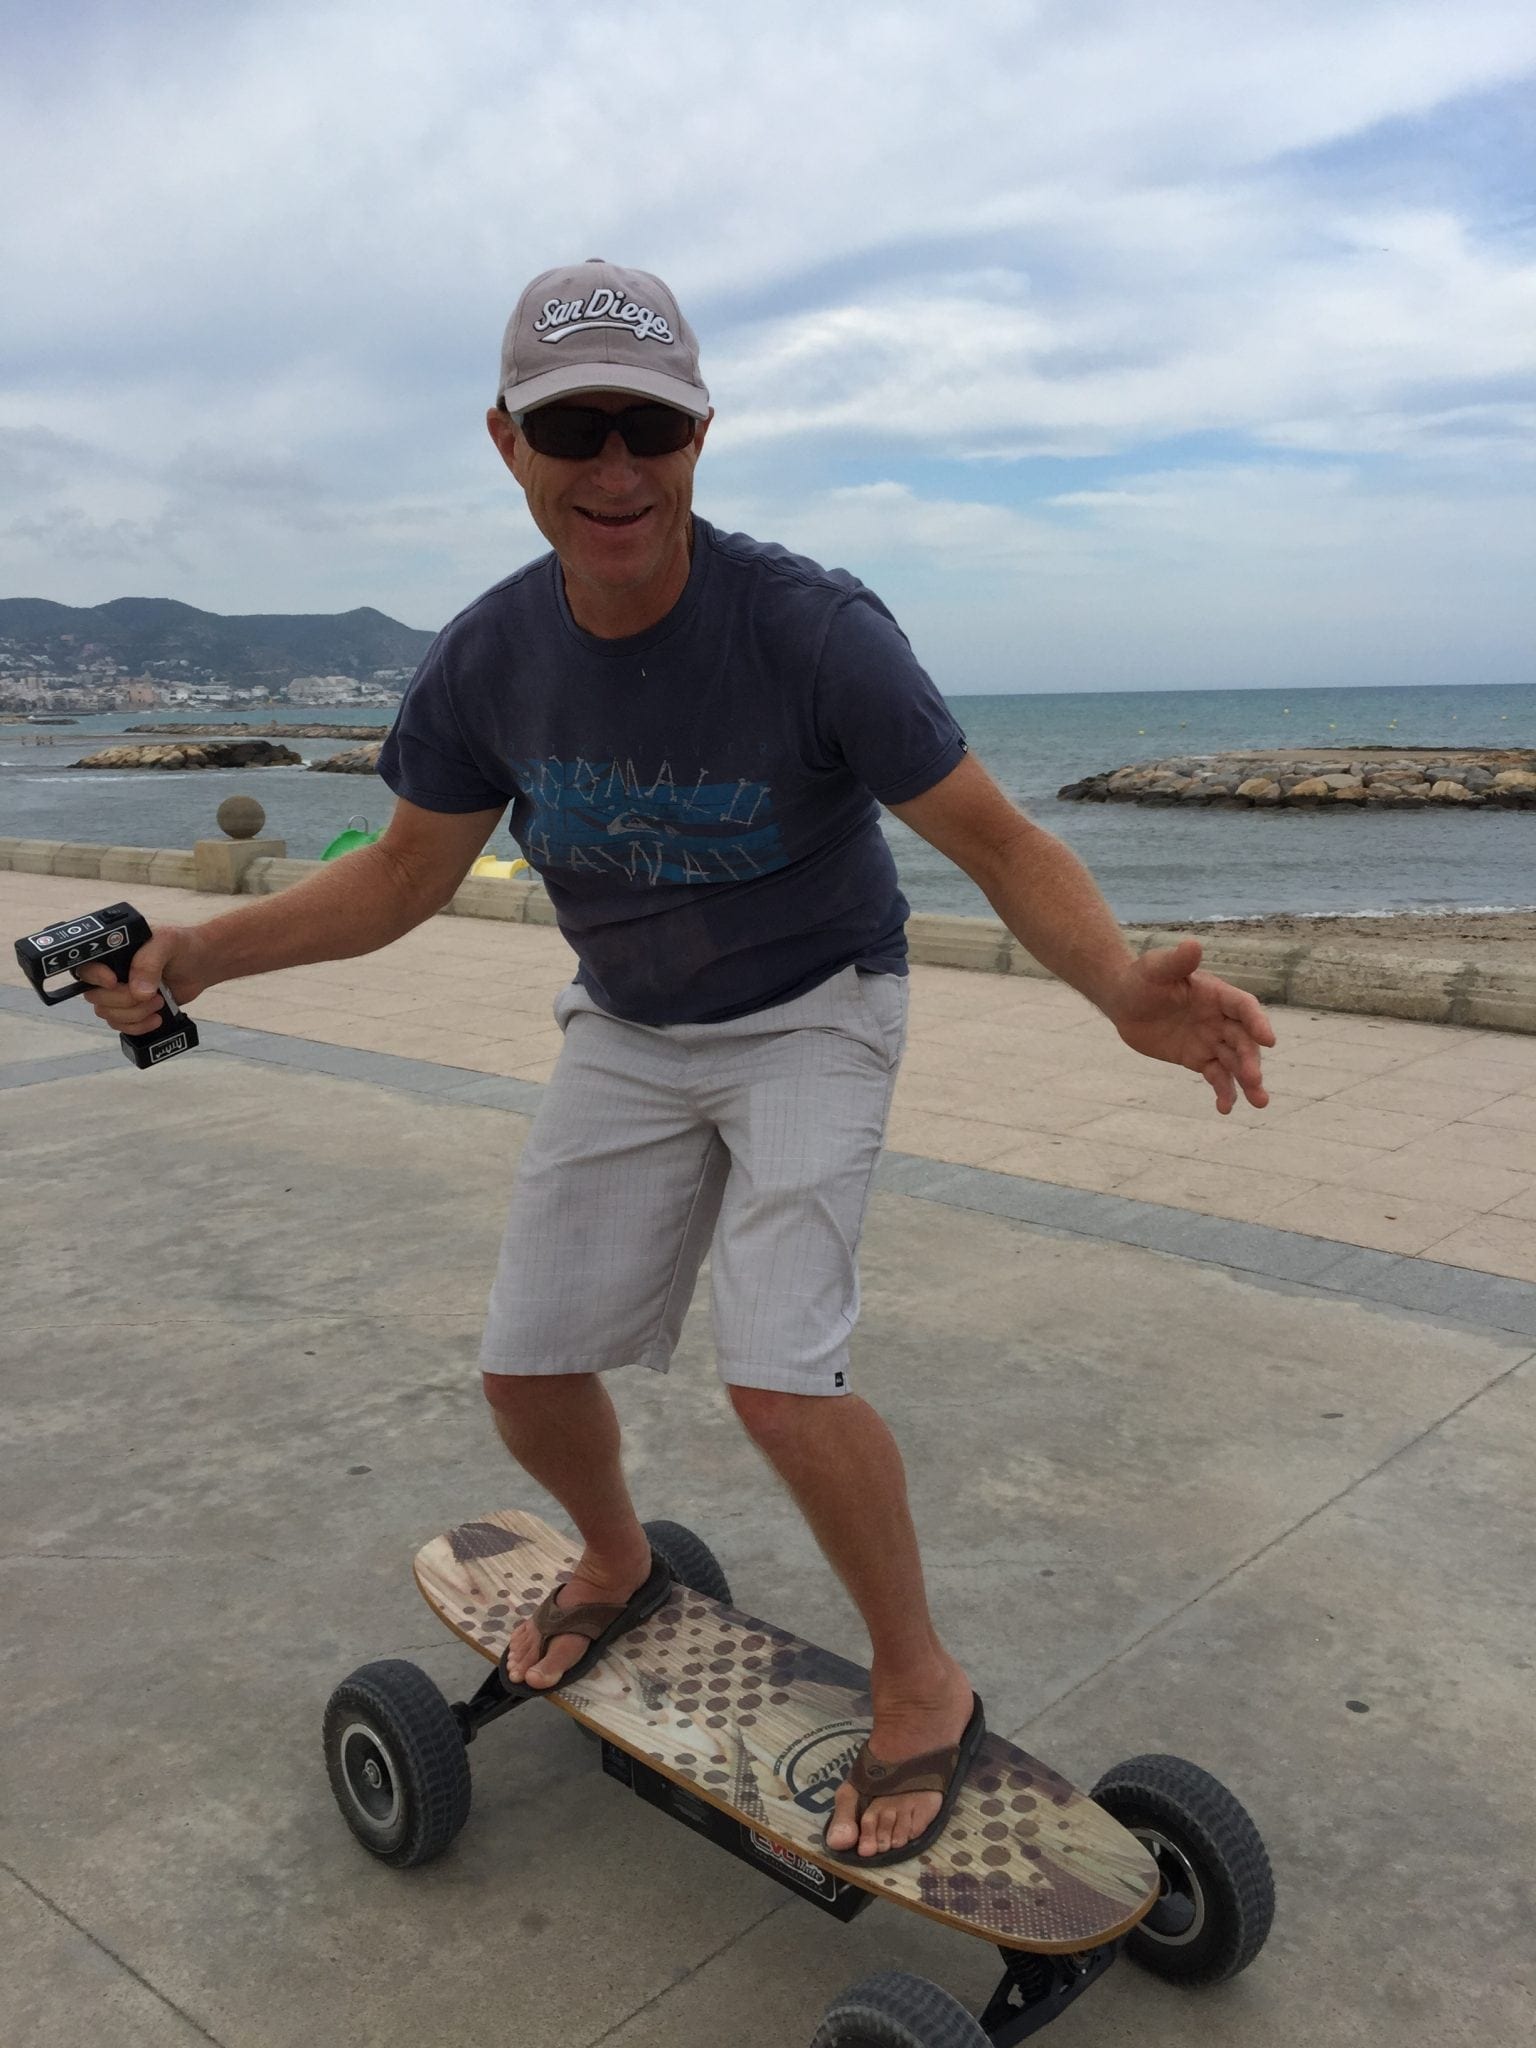 Jim chose an electric skateboard. The power comes from a lithium battery. He is holding the variable speed controller for in his hand. 